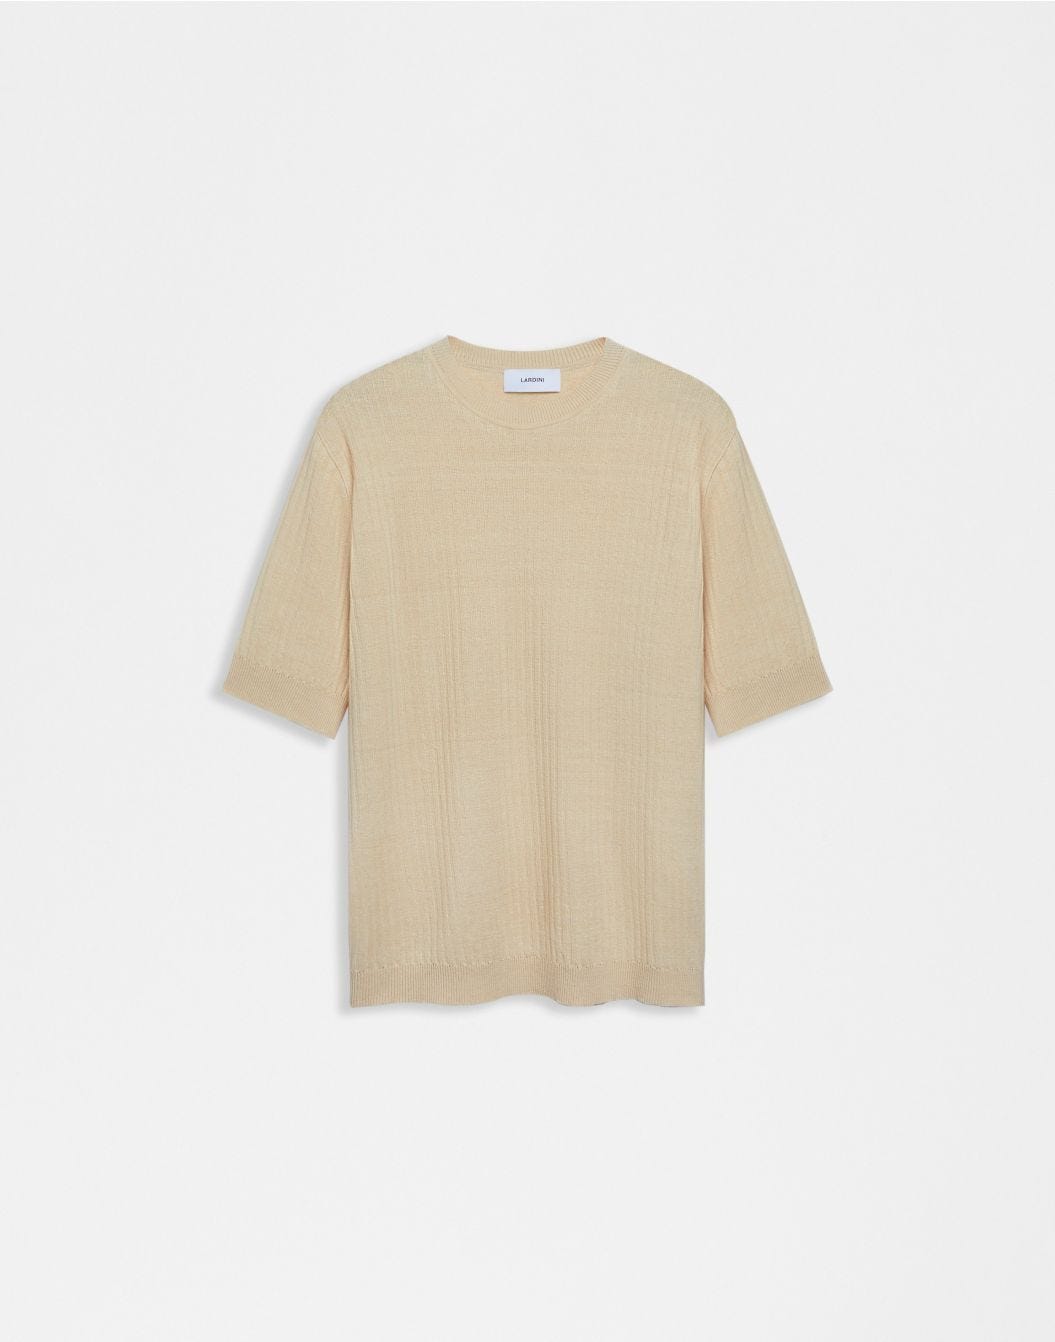 Ribbed linen and cotton cream T-shirt